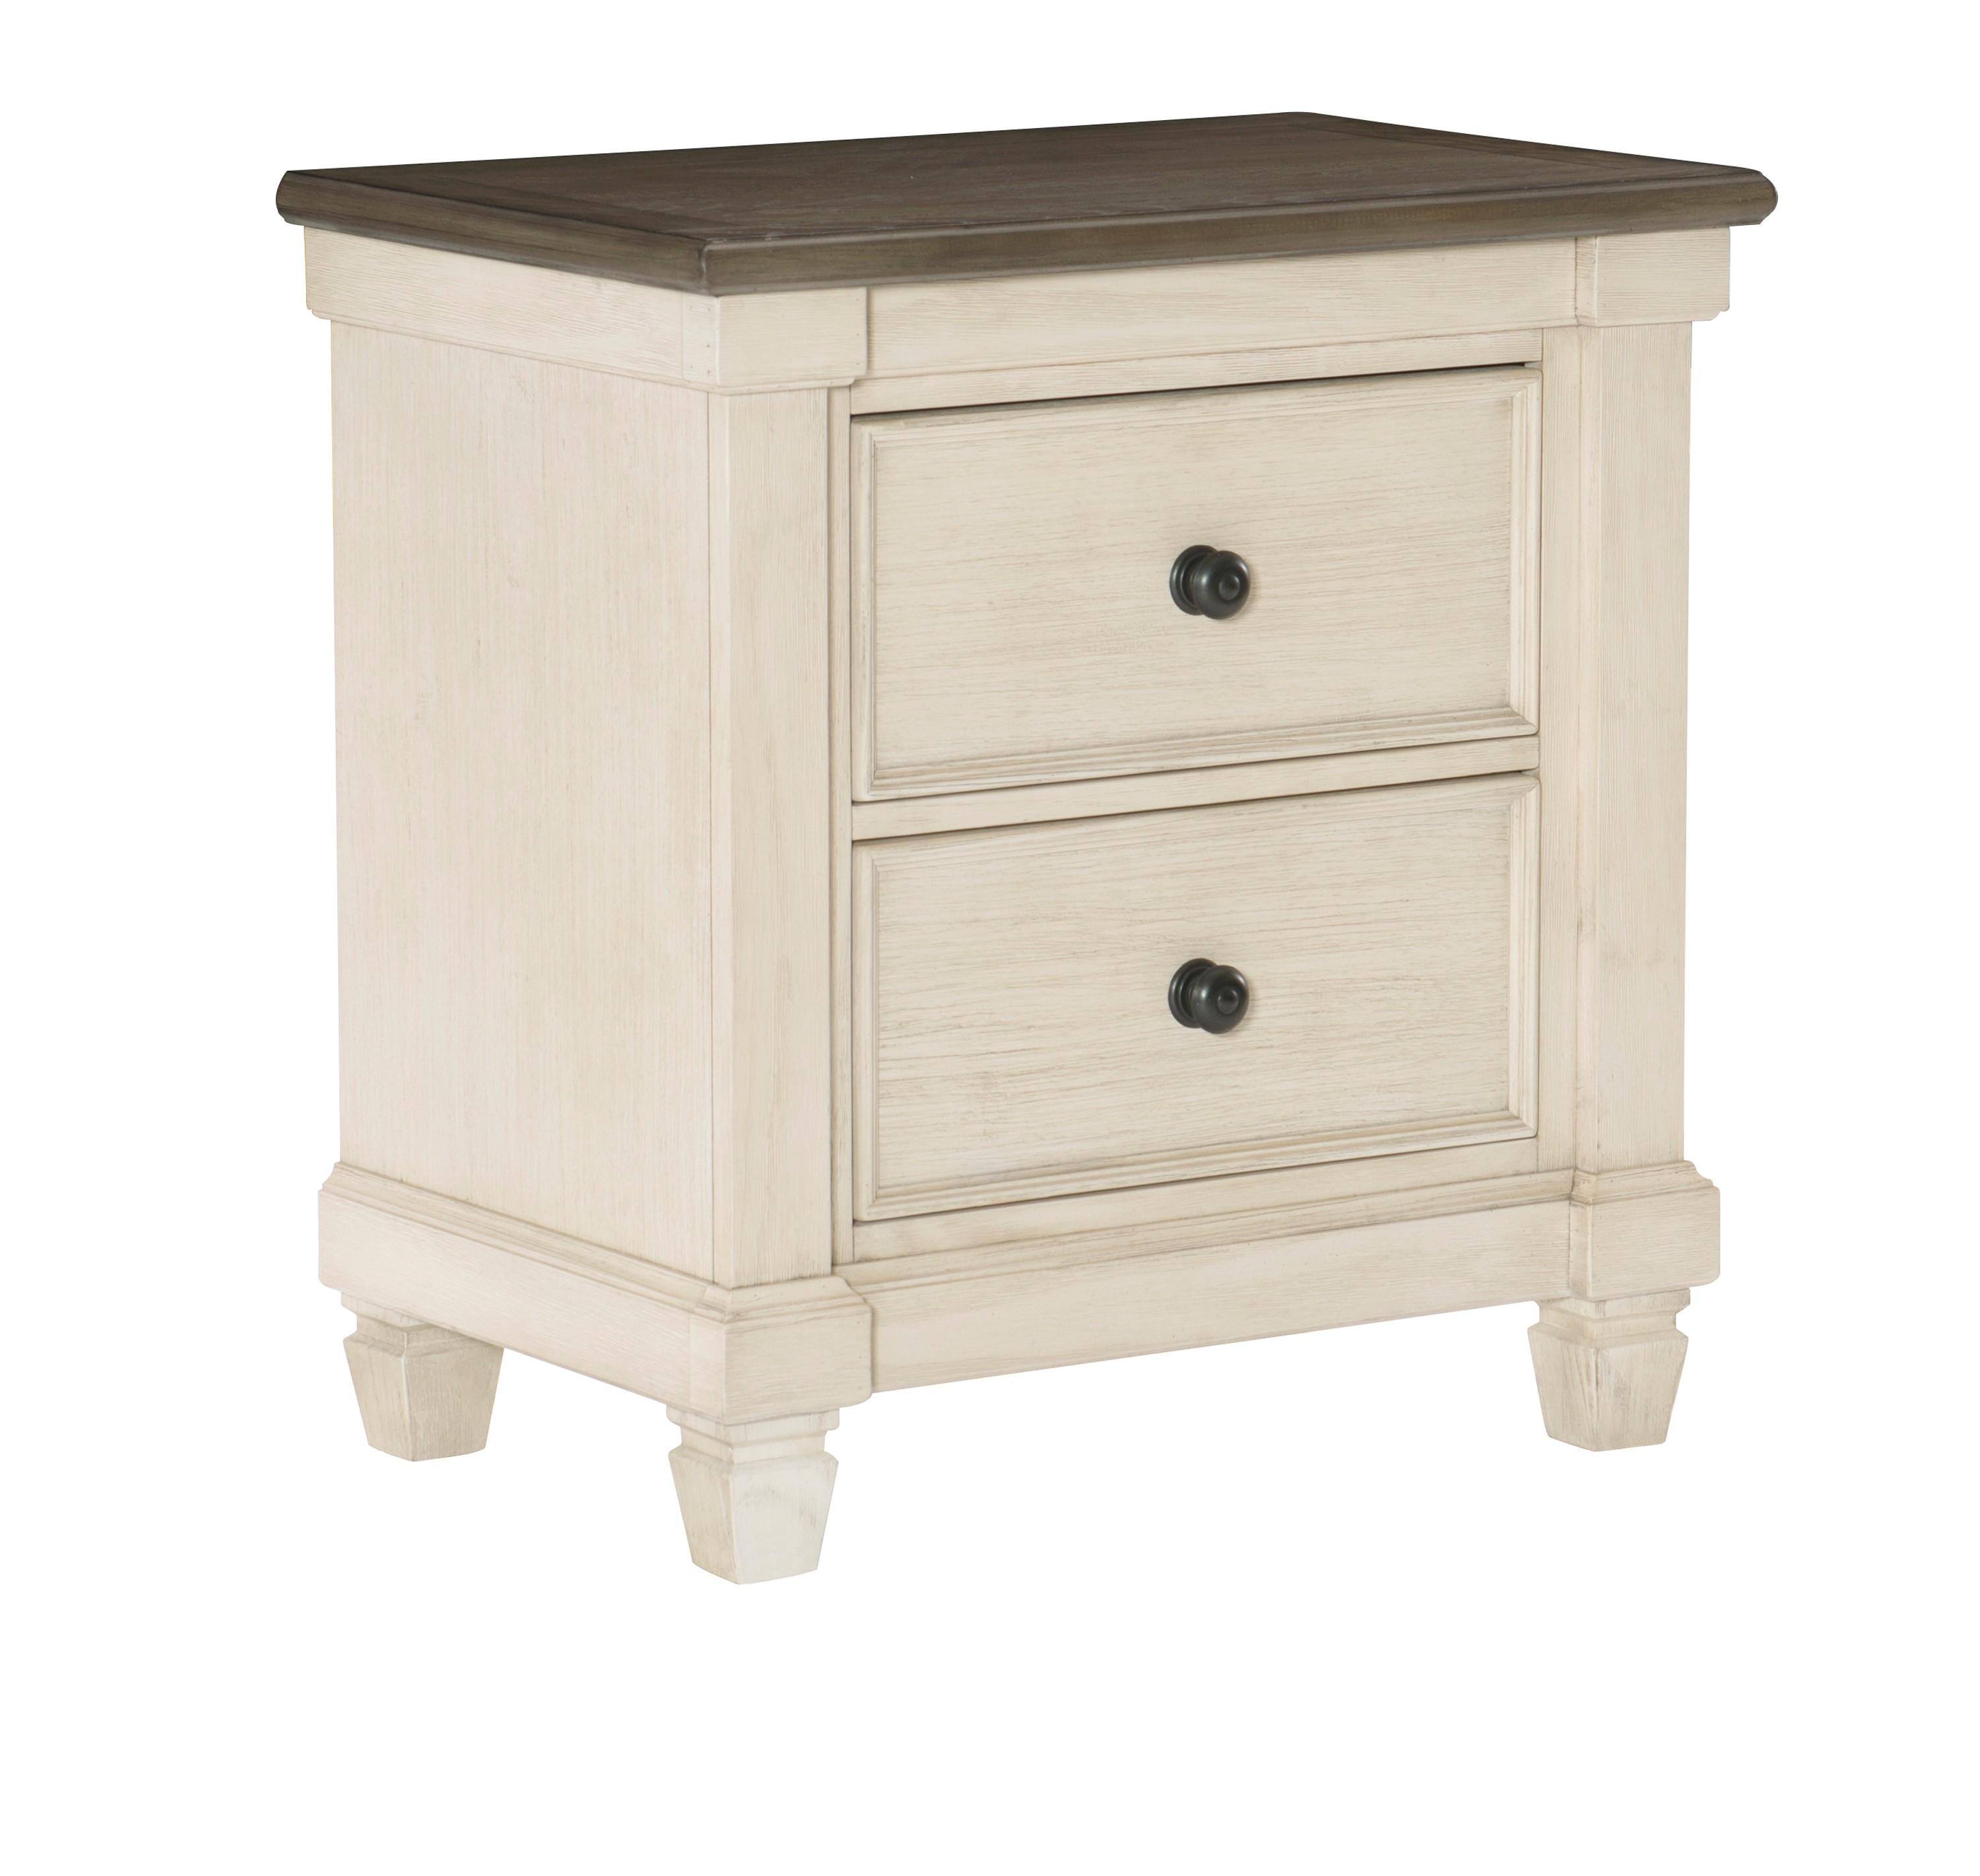 Transitional Nightstand 1626-4 Weaver 1626-4 in Antique White, Brown 